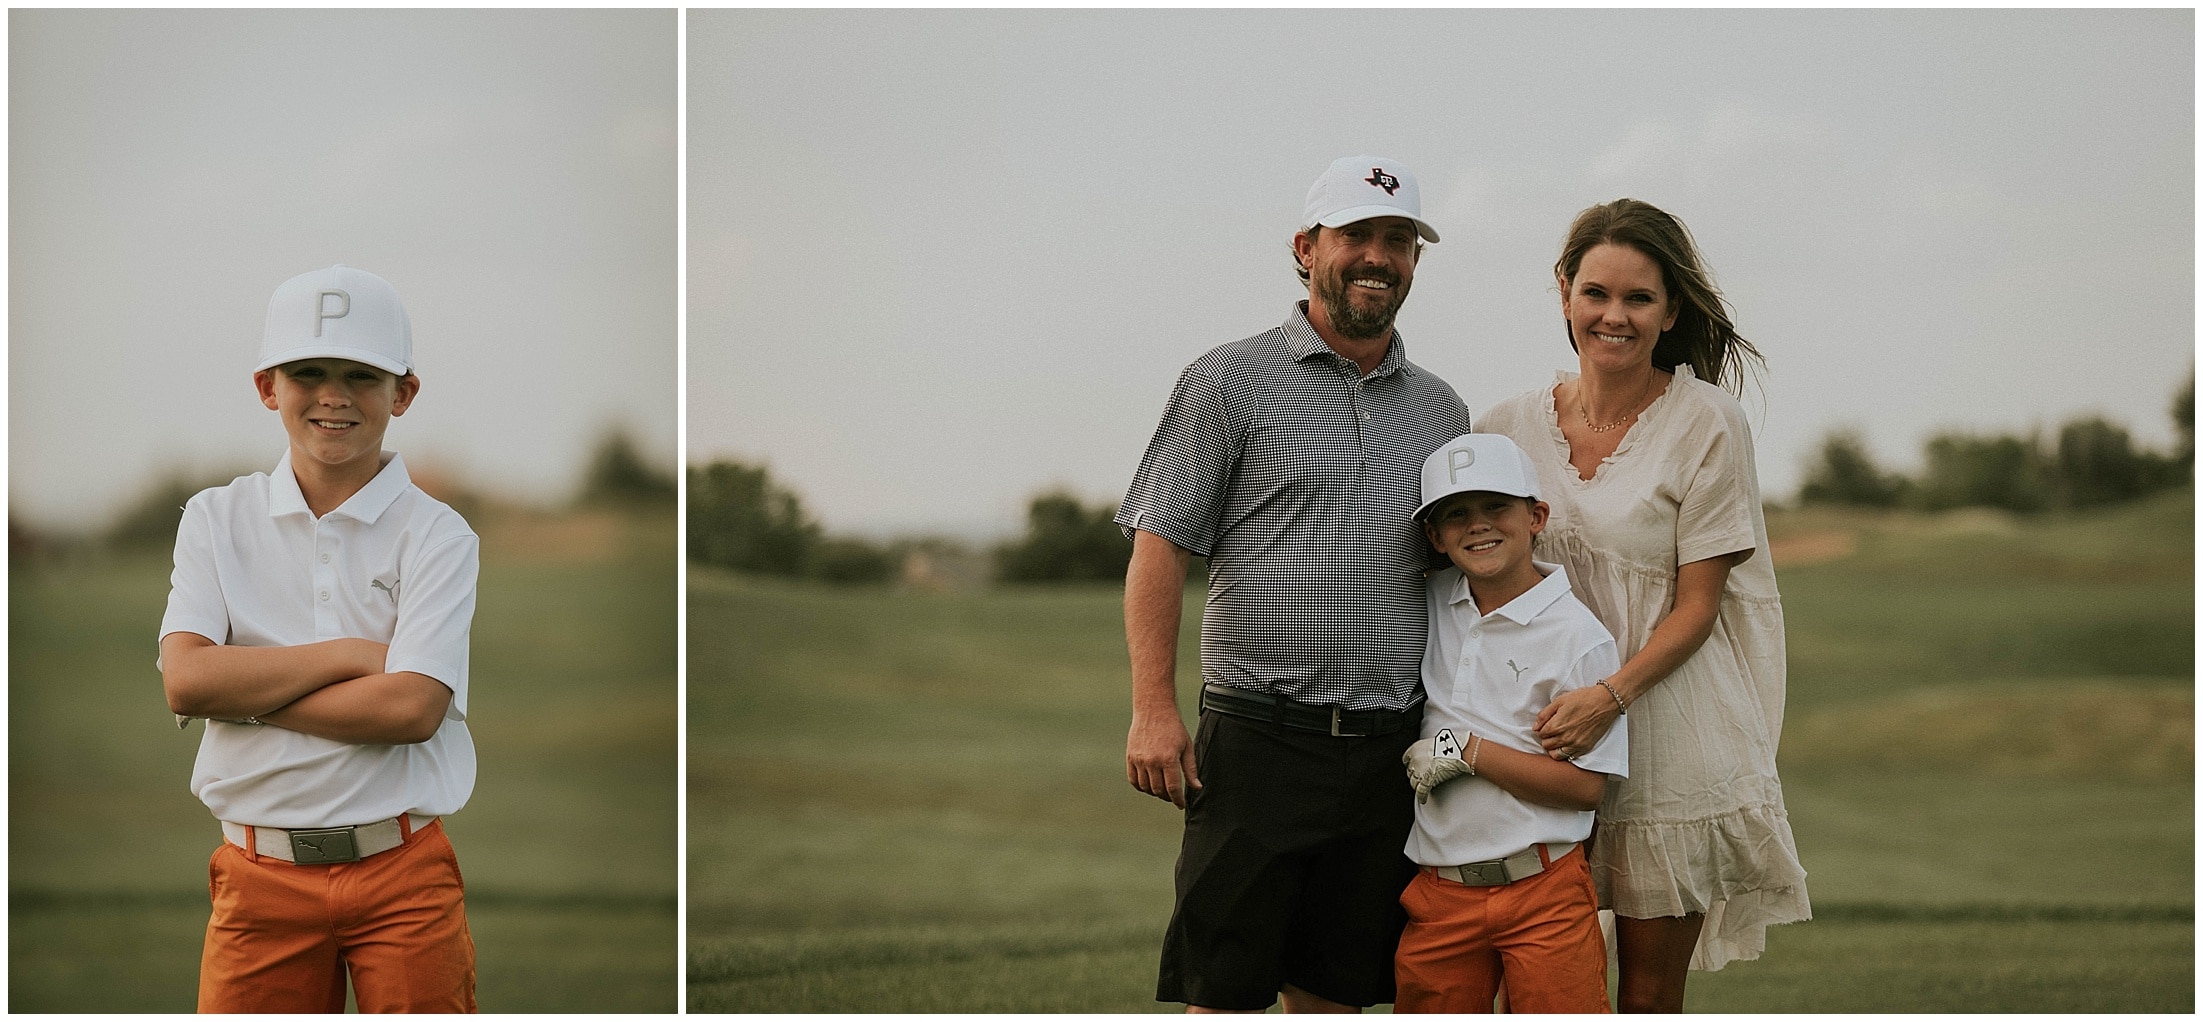 Tascosa Golf Club, Amarillo Golf, places to golf in amarillo, king ranch, king family, king and cattle, amarillo family photographer, stork vision amarillo, mom dad son, amarillo photographer, photographer near me, family, lubbock photographer, kids who golf, parents who golf, how to golf, 